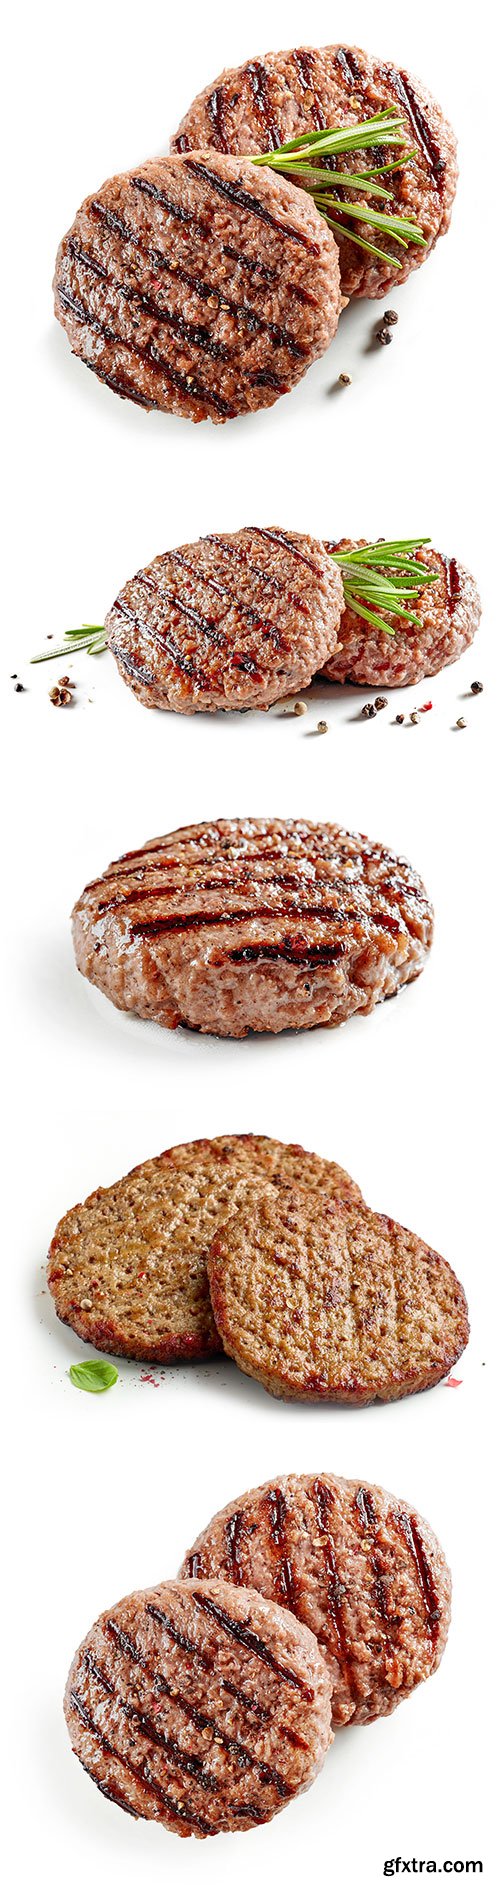 Freshly Grilled Burger Meat Isolated - 8xJPGs